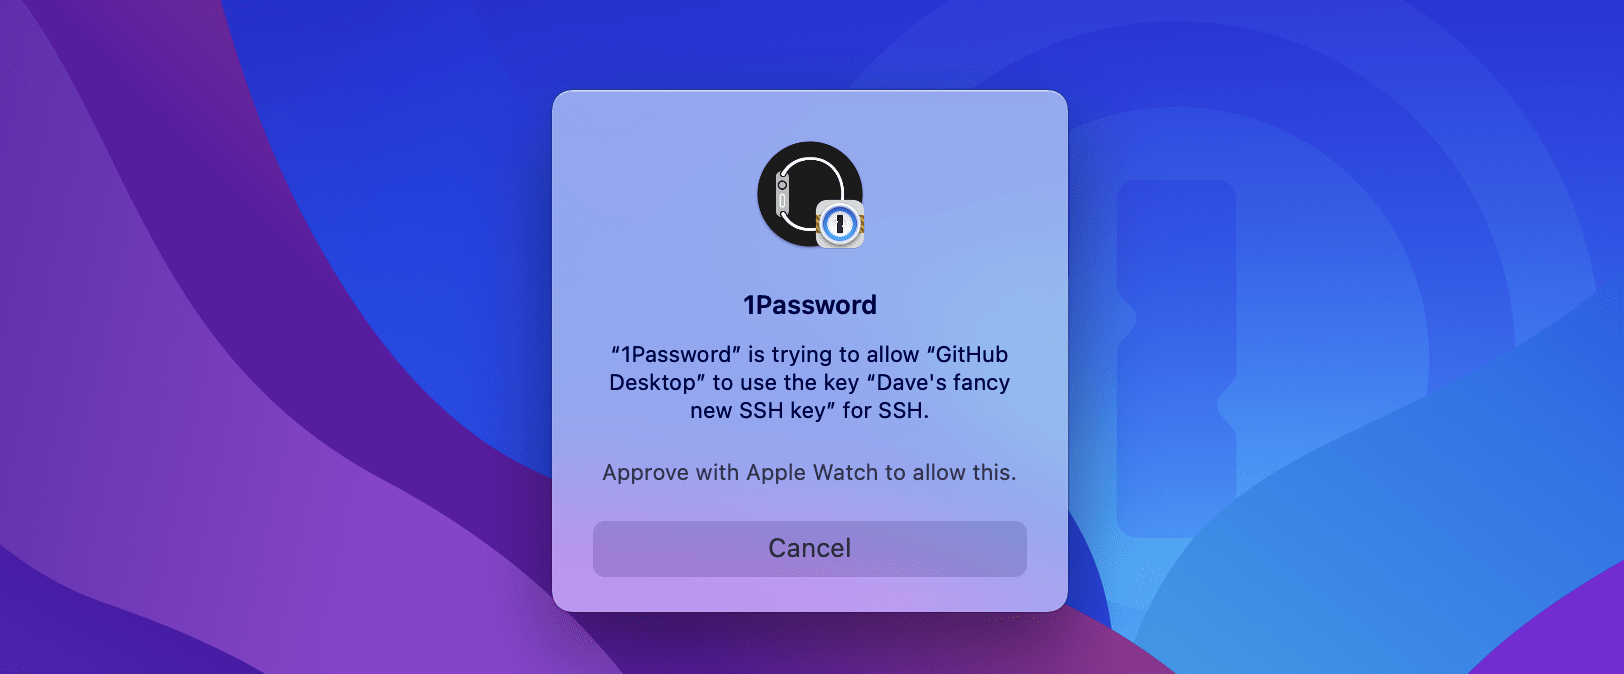 Popup window to authorize SSH key use in 1Password using an Apple Watch